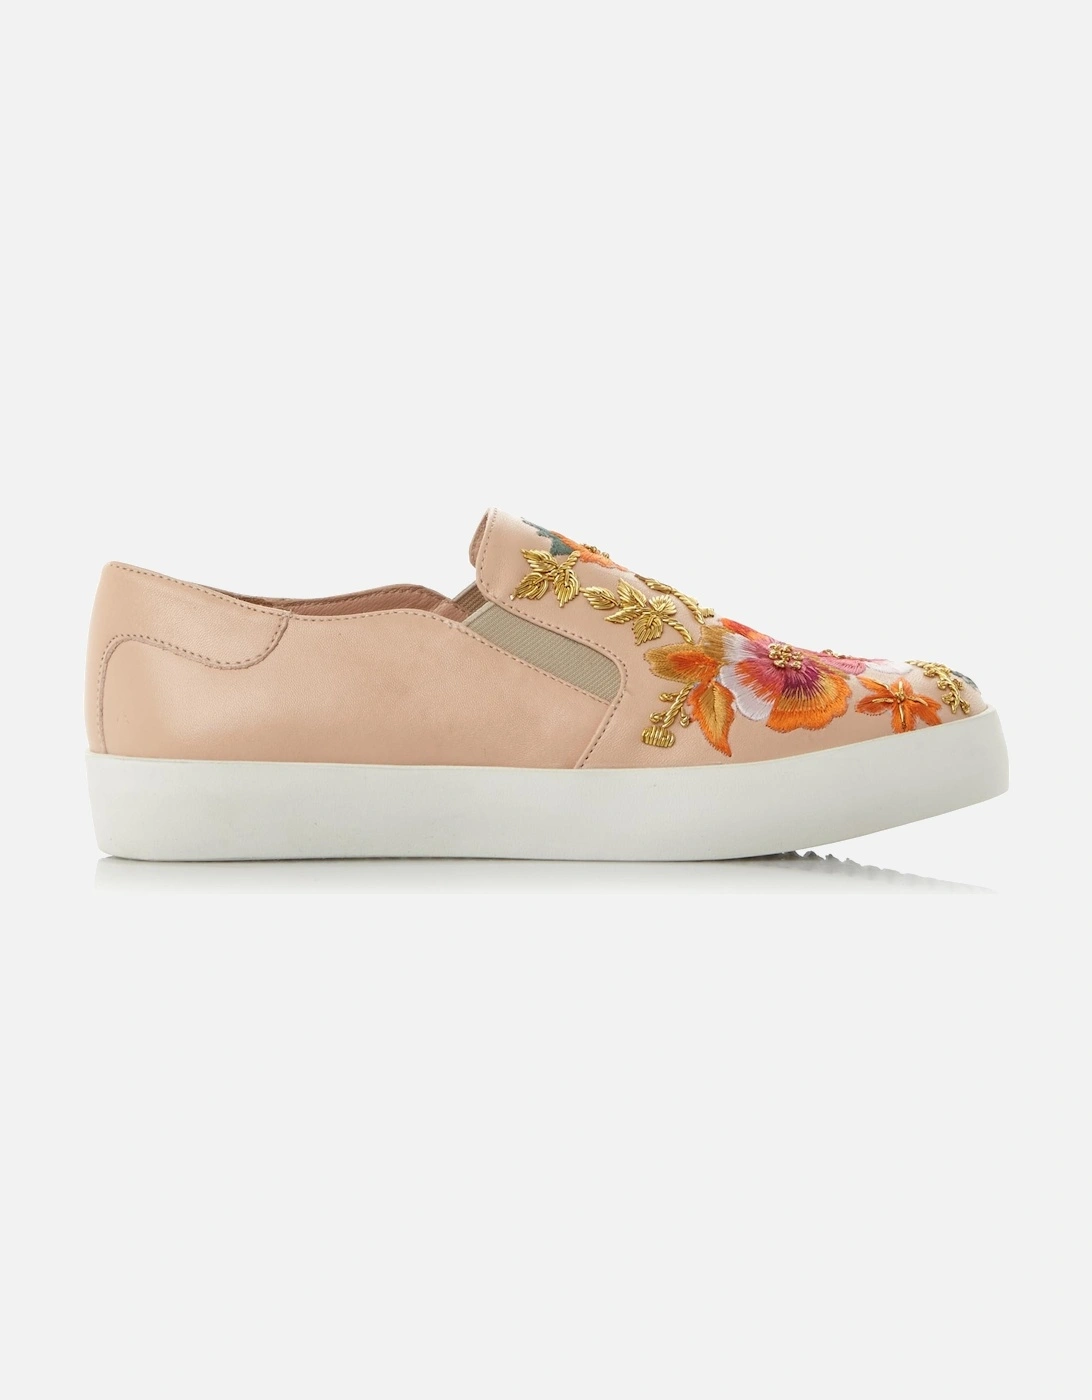 Ladies Espyy - Embroidered Slip On Shoes